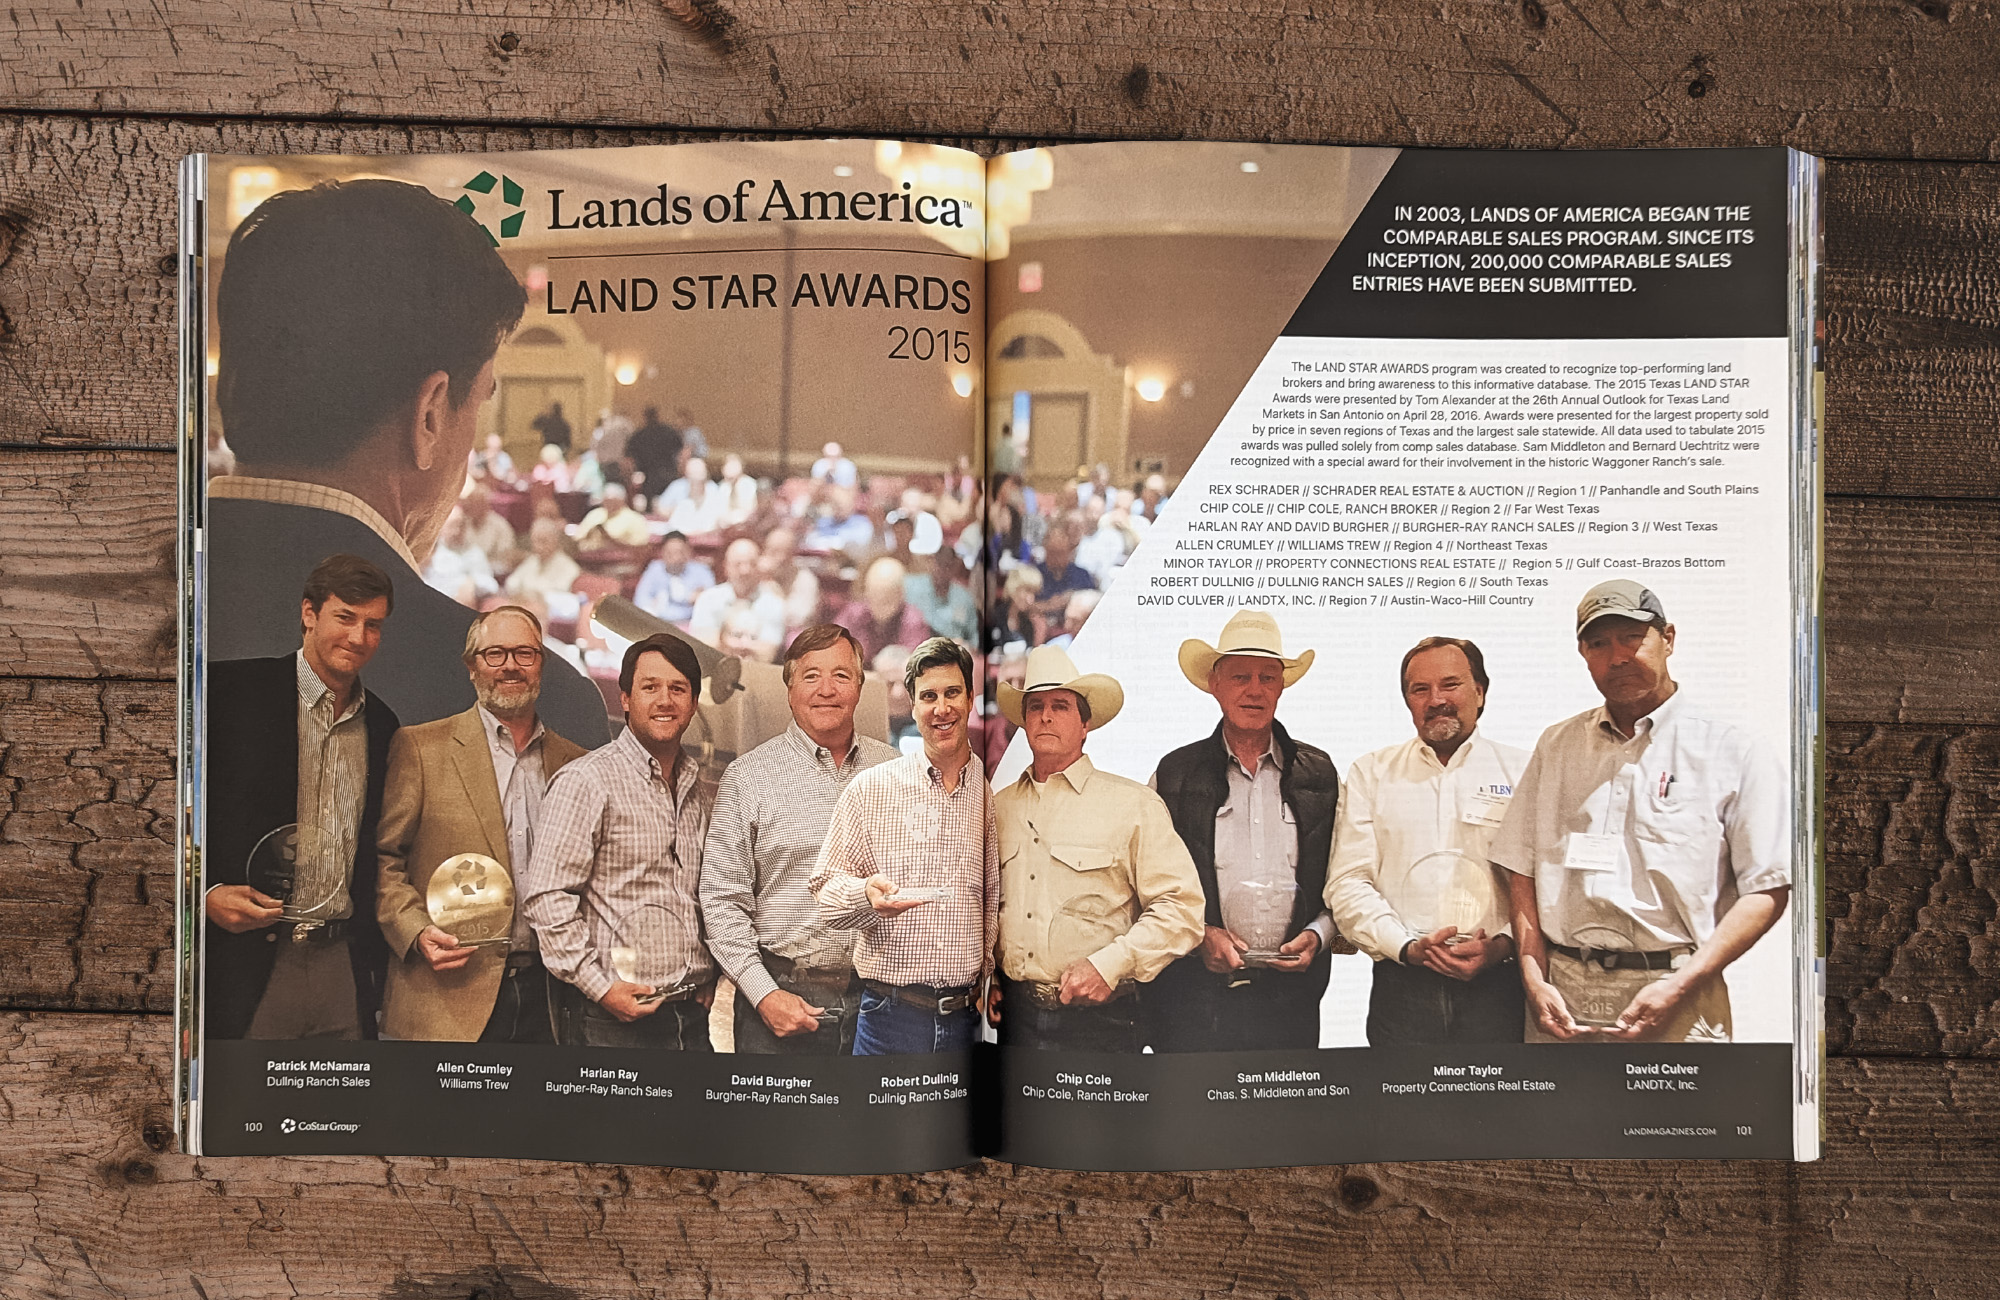 A magazine on a wooden surface open to an editorial spread covering the inaugural awards for the top land brokers enrolled in the comparable sales program. Across the bottom of the spread are  nine men holding their awards.